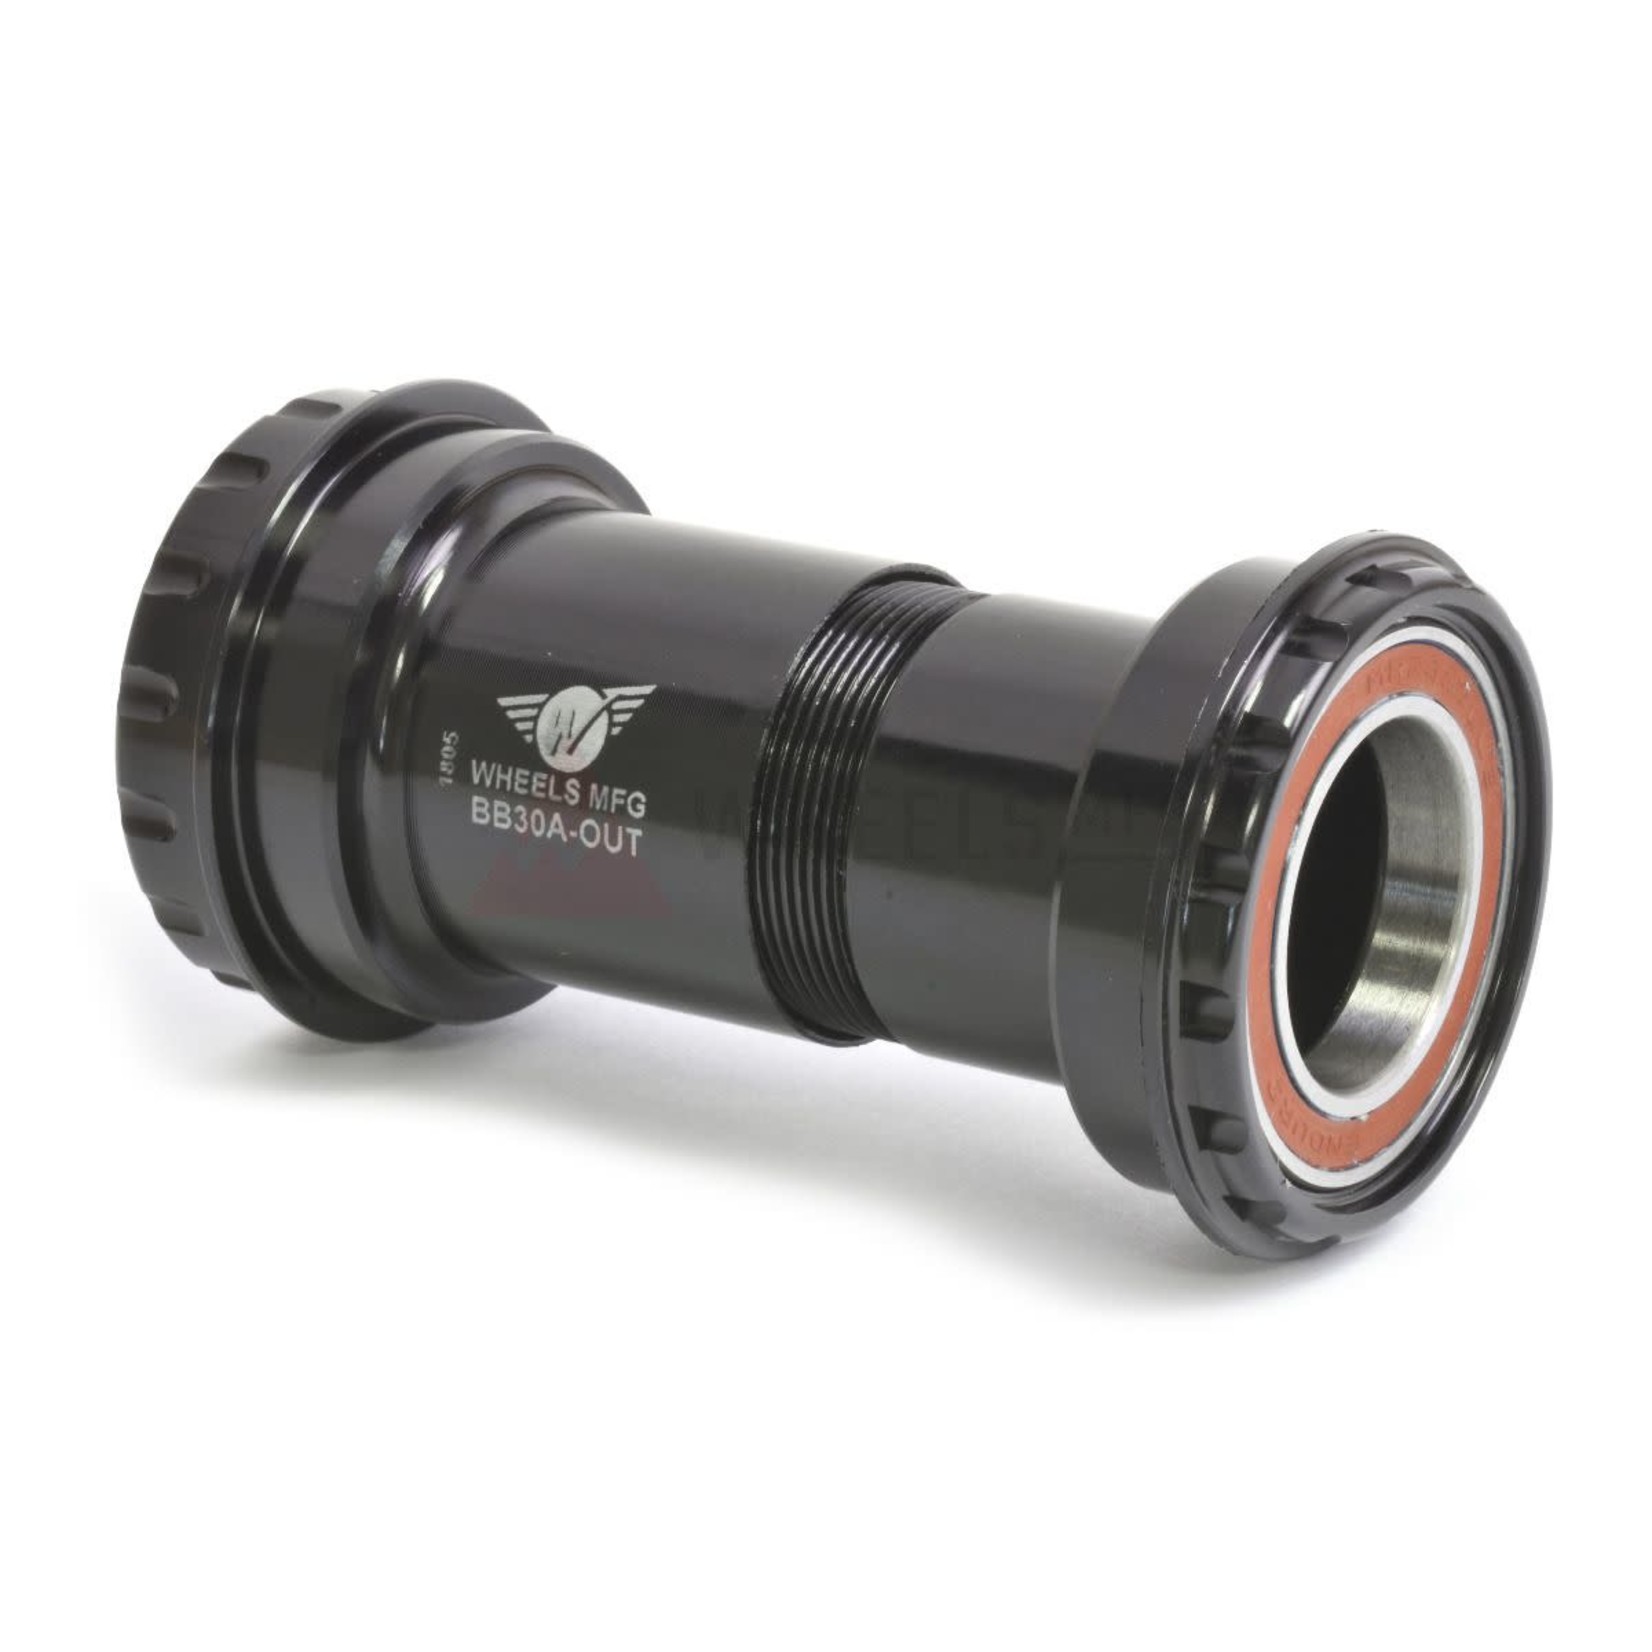 Wheels Manufacturing Wheels Mfg Bottom Bracket - BB30A Outboard Angular Contact BB for 24mm Cranks (Shimano)